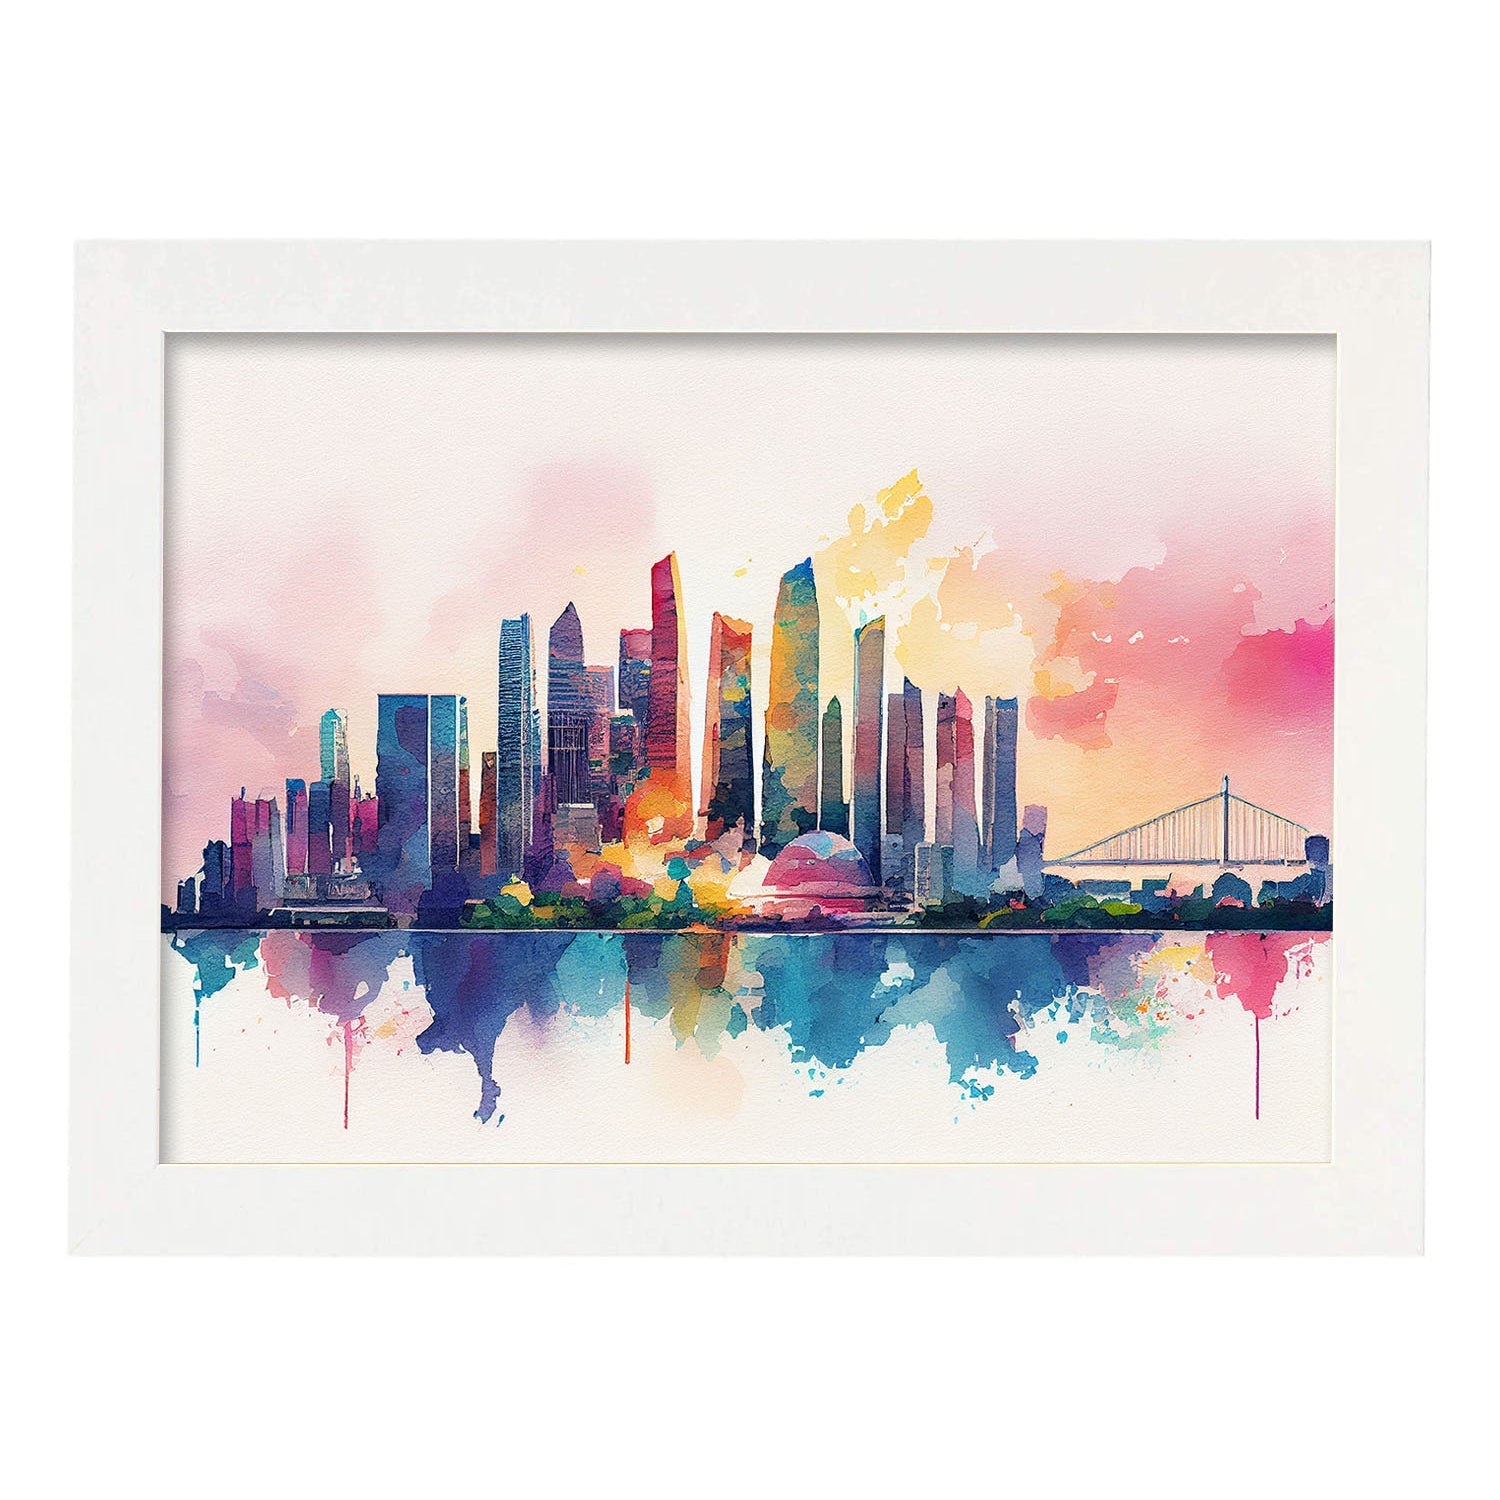 Nacnic watercolor of a skyline of the city of Singapore_1. Aesthetic Wall Art Prints for Bedroom or Living Room Design.-Artwork-Nacnic-A4-Marco Blanco-Nacnic Estudio SL